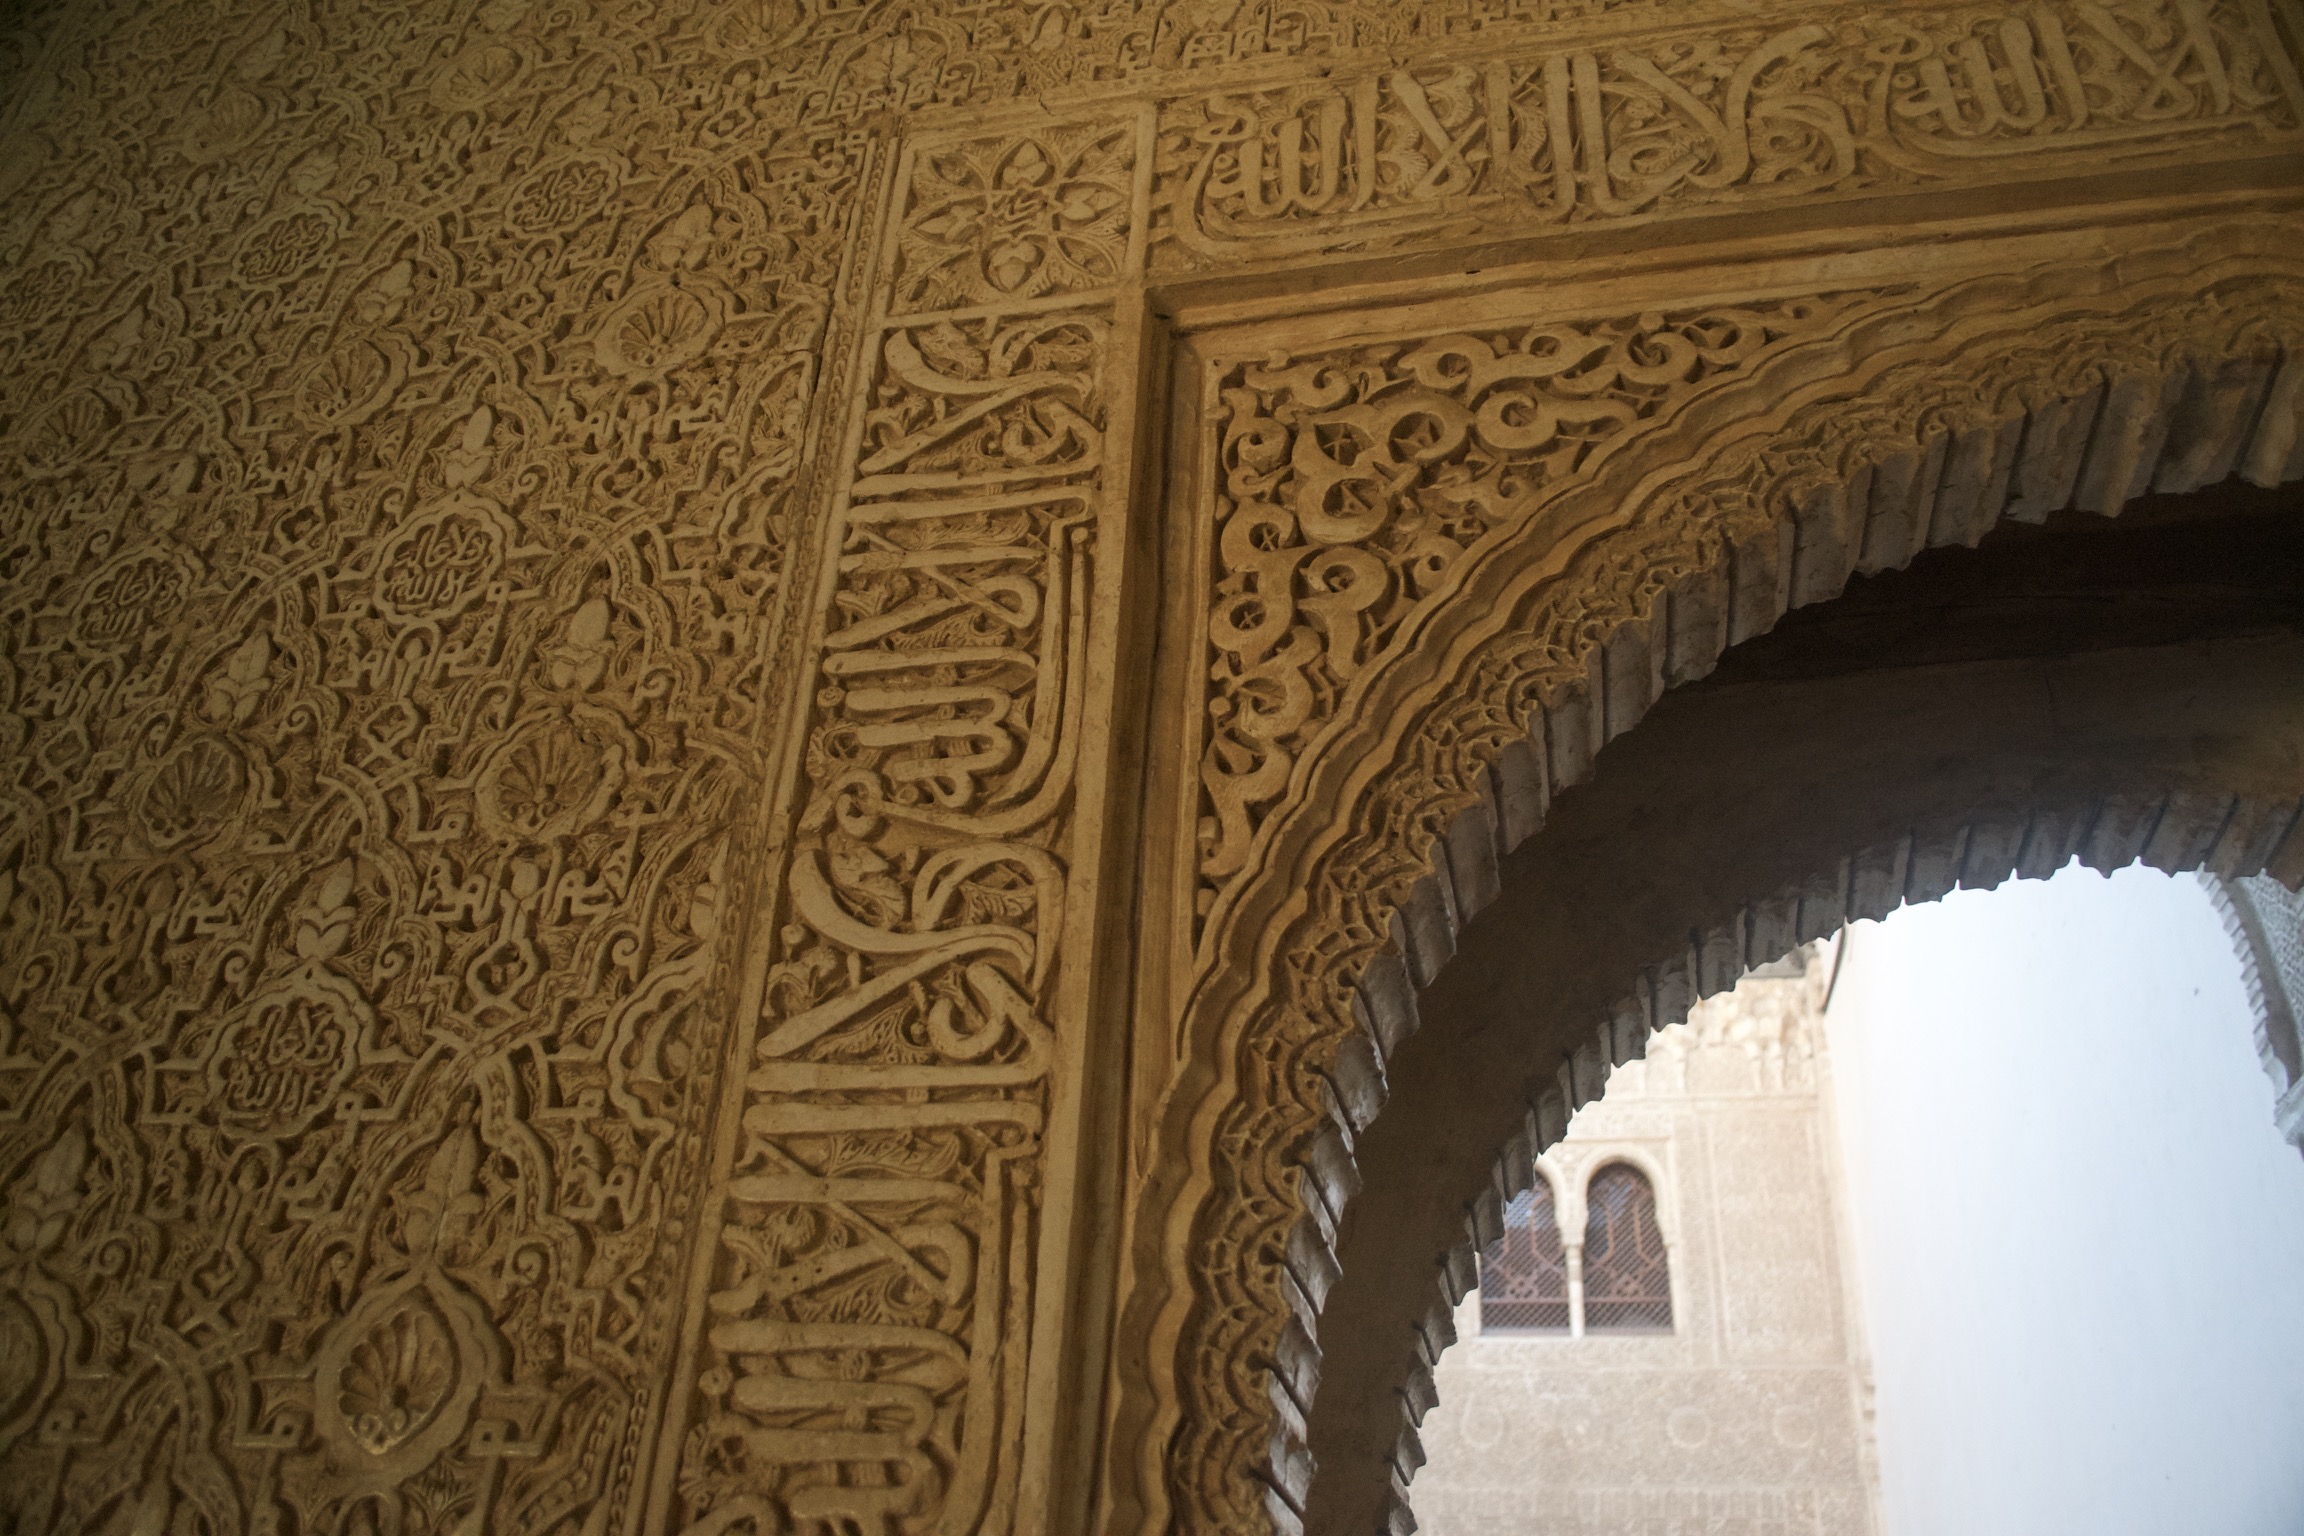 Details of the intricate designs and inscriptions on the wall surrounding an arched doorway.